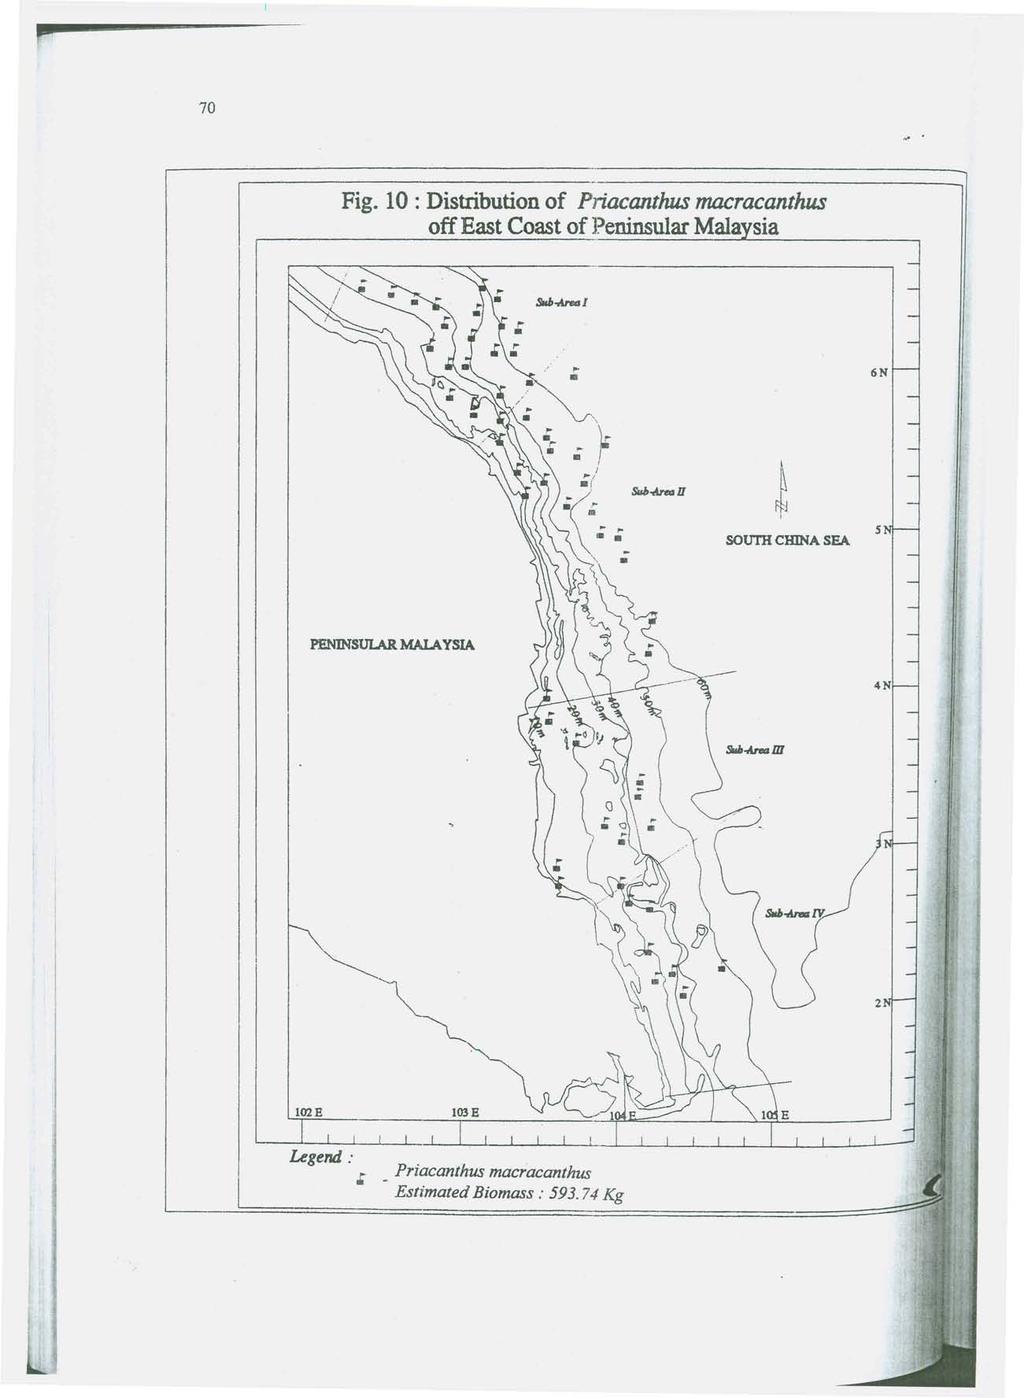 Fig. 10: Distribution of Priacanthus macracanthus o_ff_e_as_t_c_o_as_t_o_f.